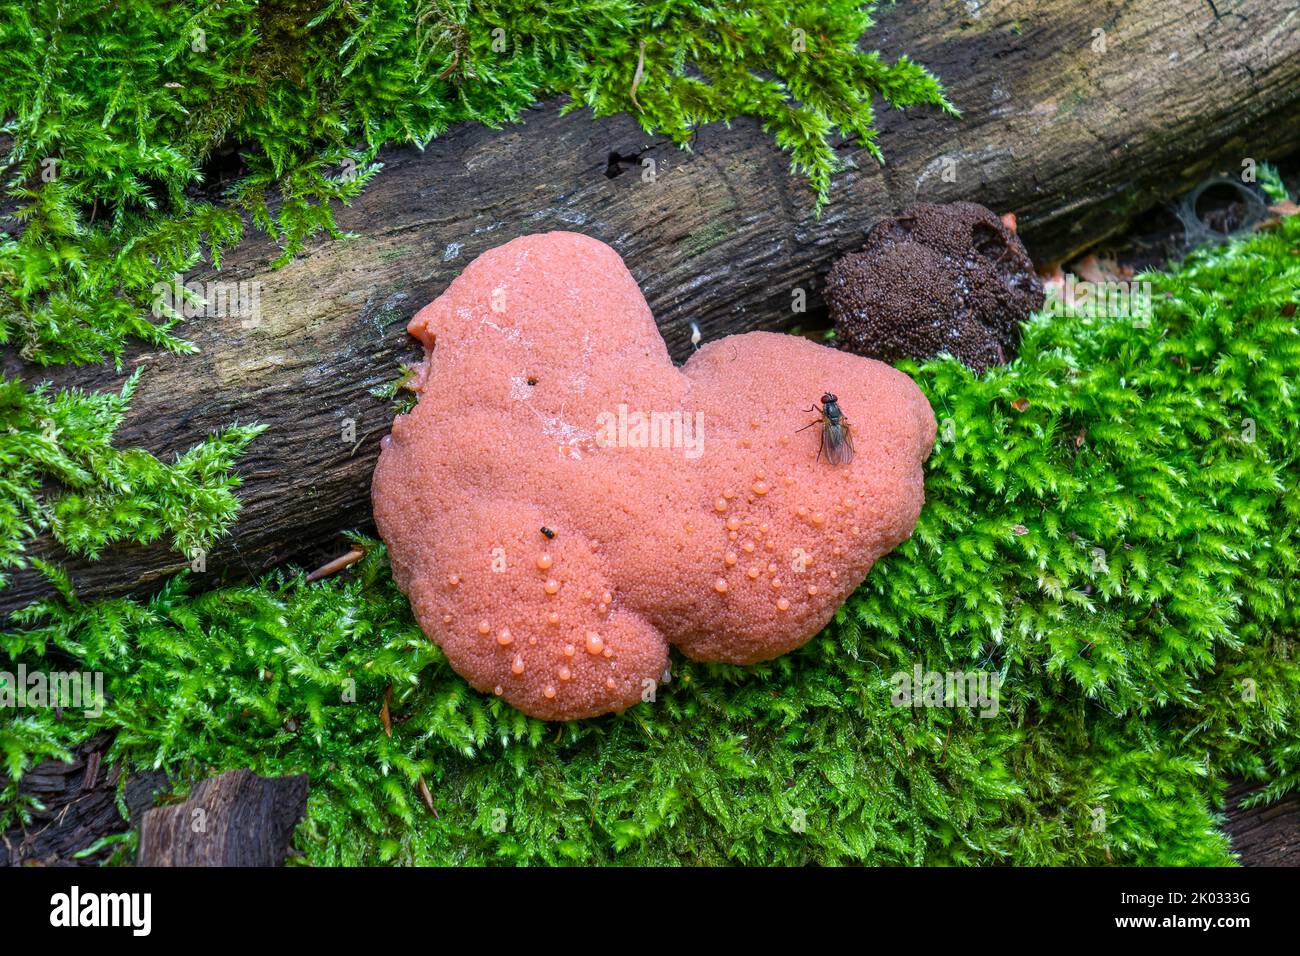 Red slime fungus, slime mold on dead wood Stock Photo